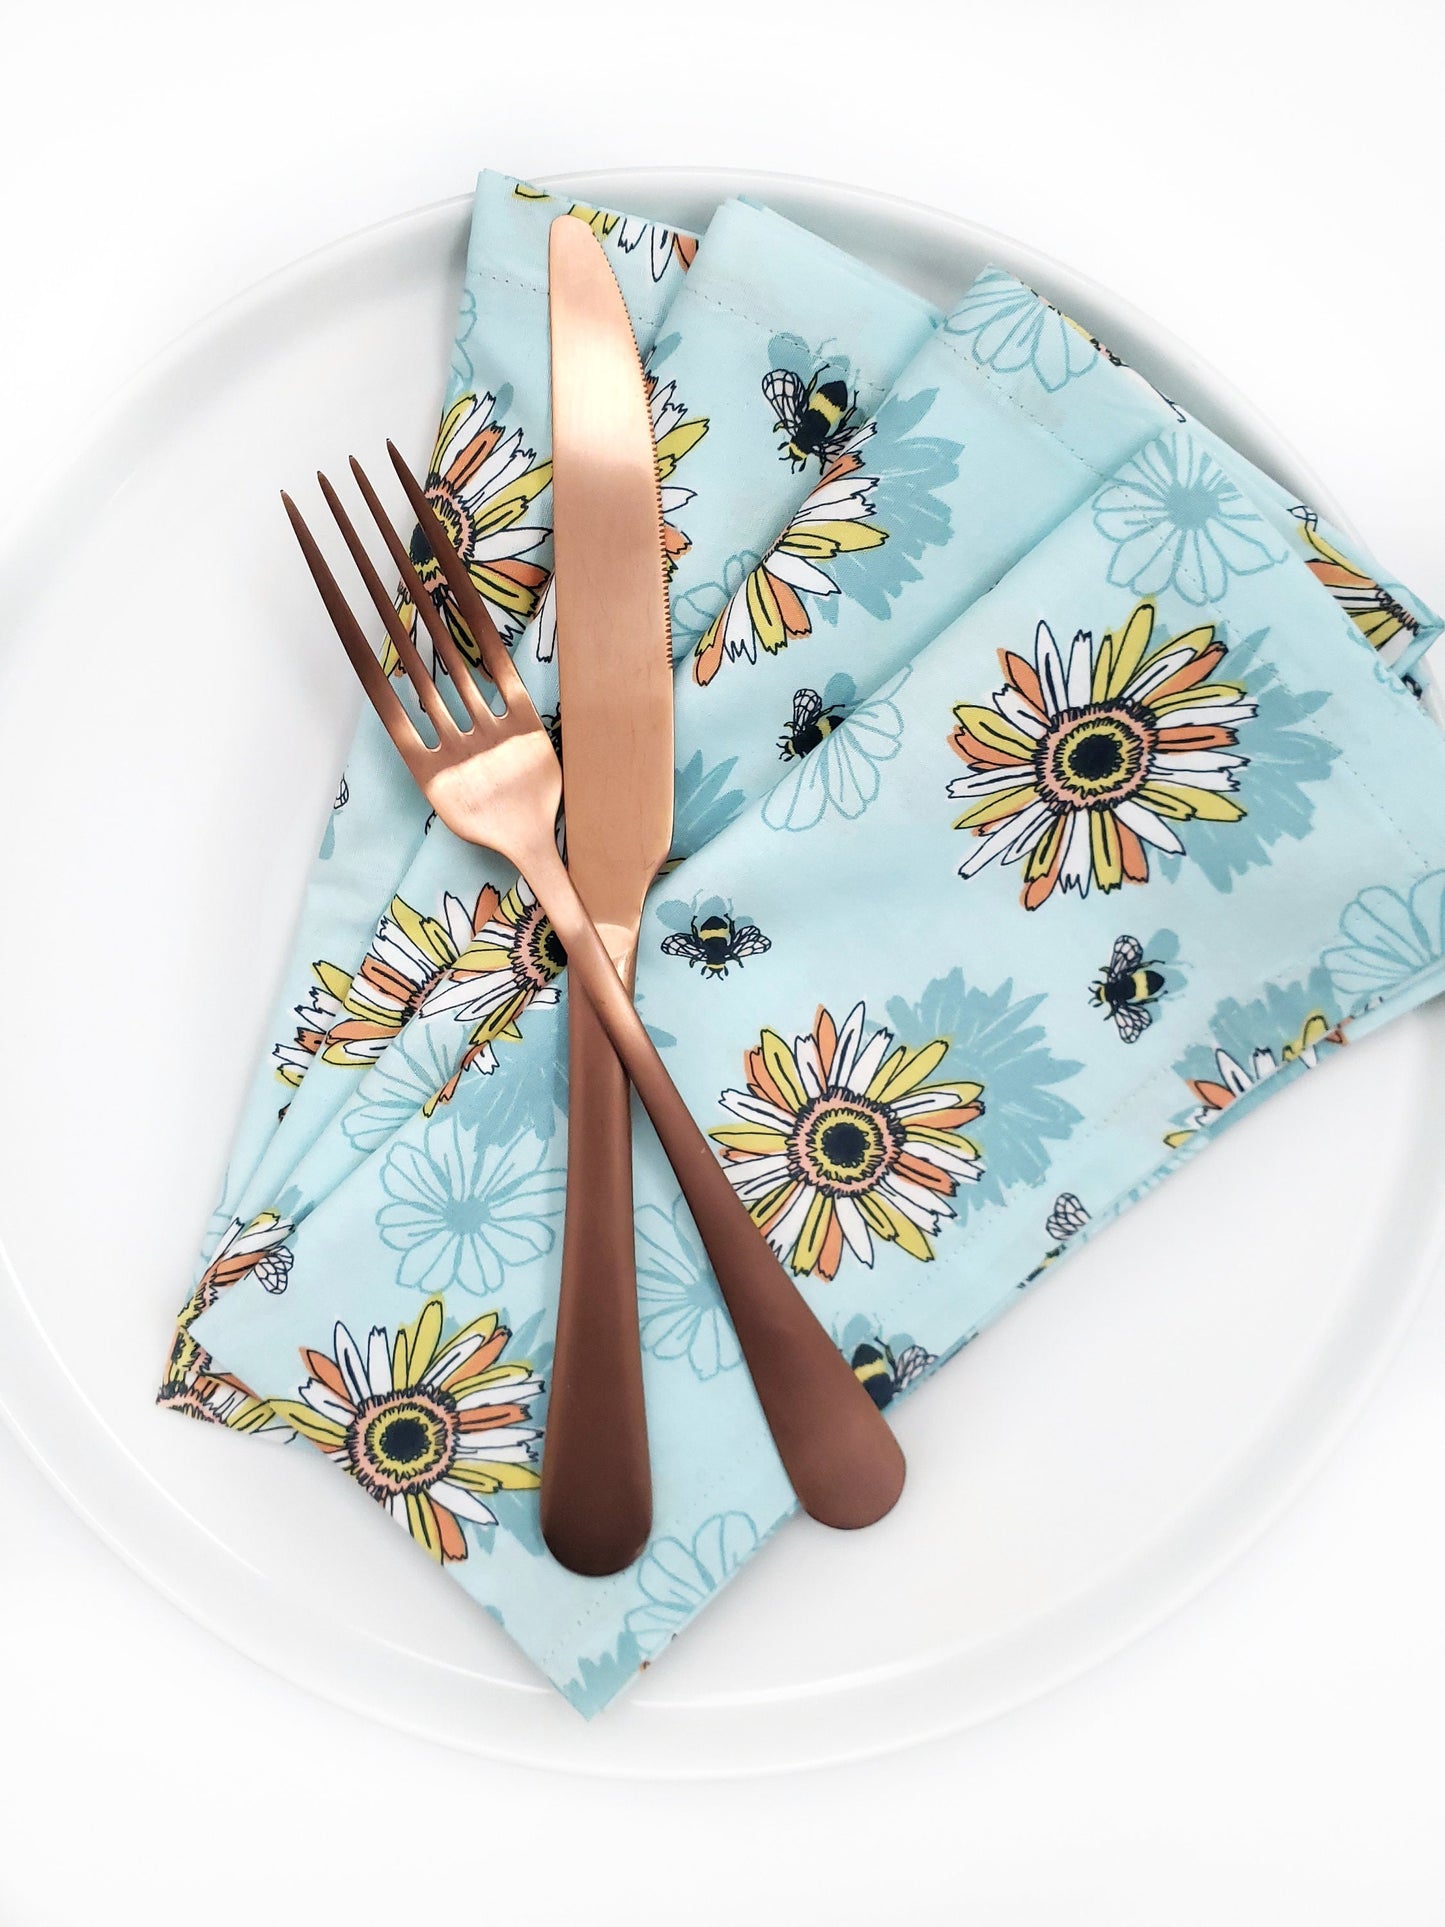 Blue Daisies and Bees Cloth Napkins, Set of 4